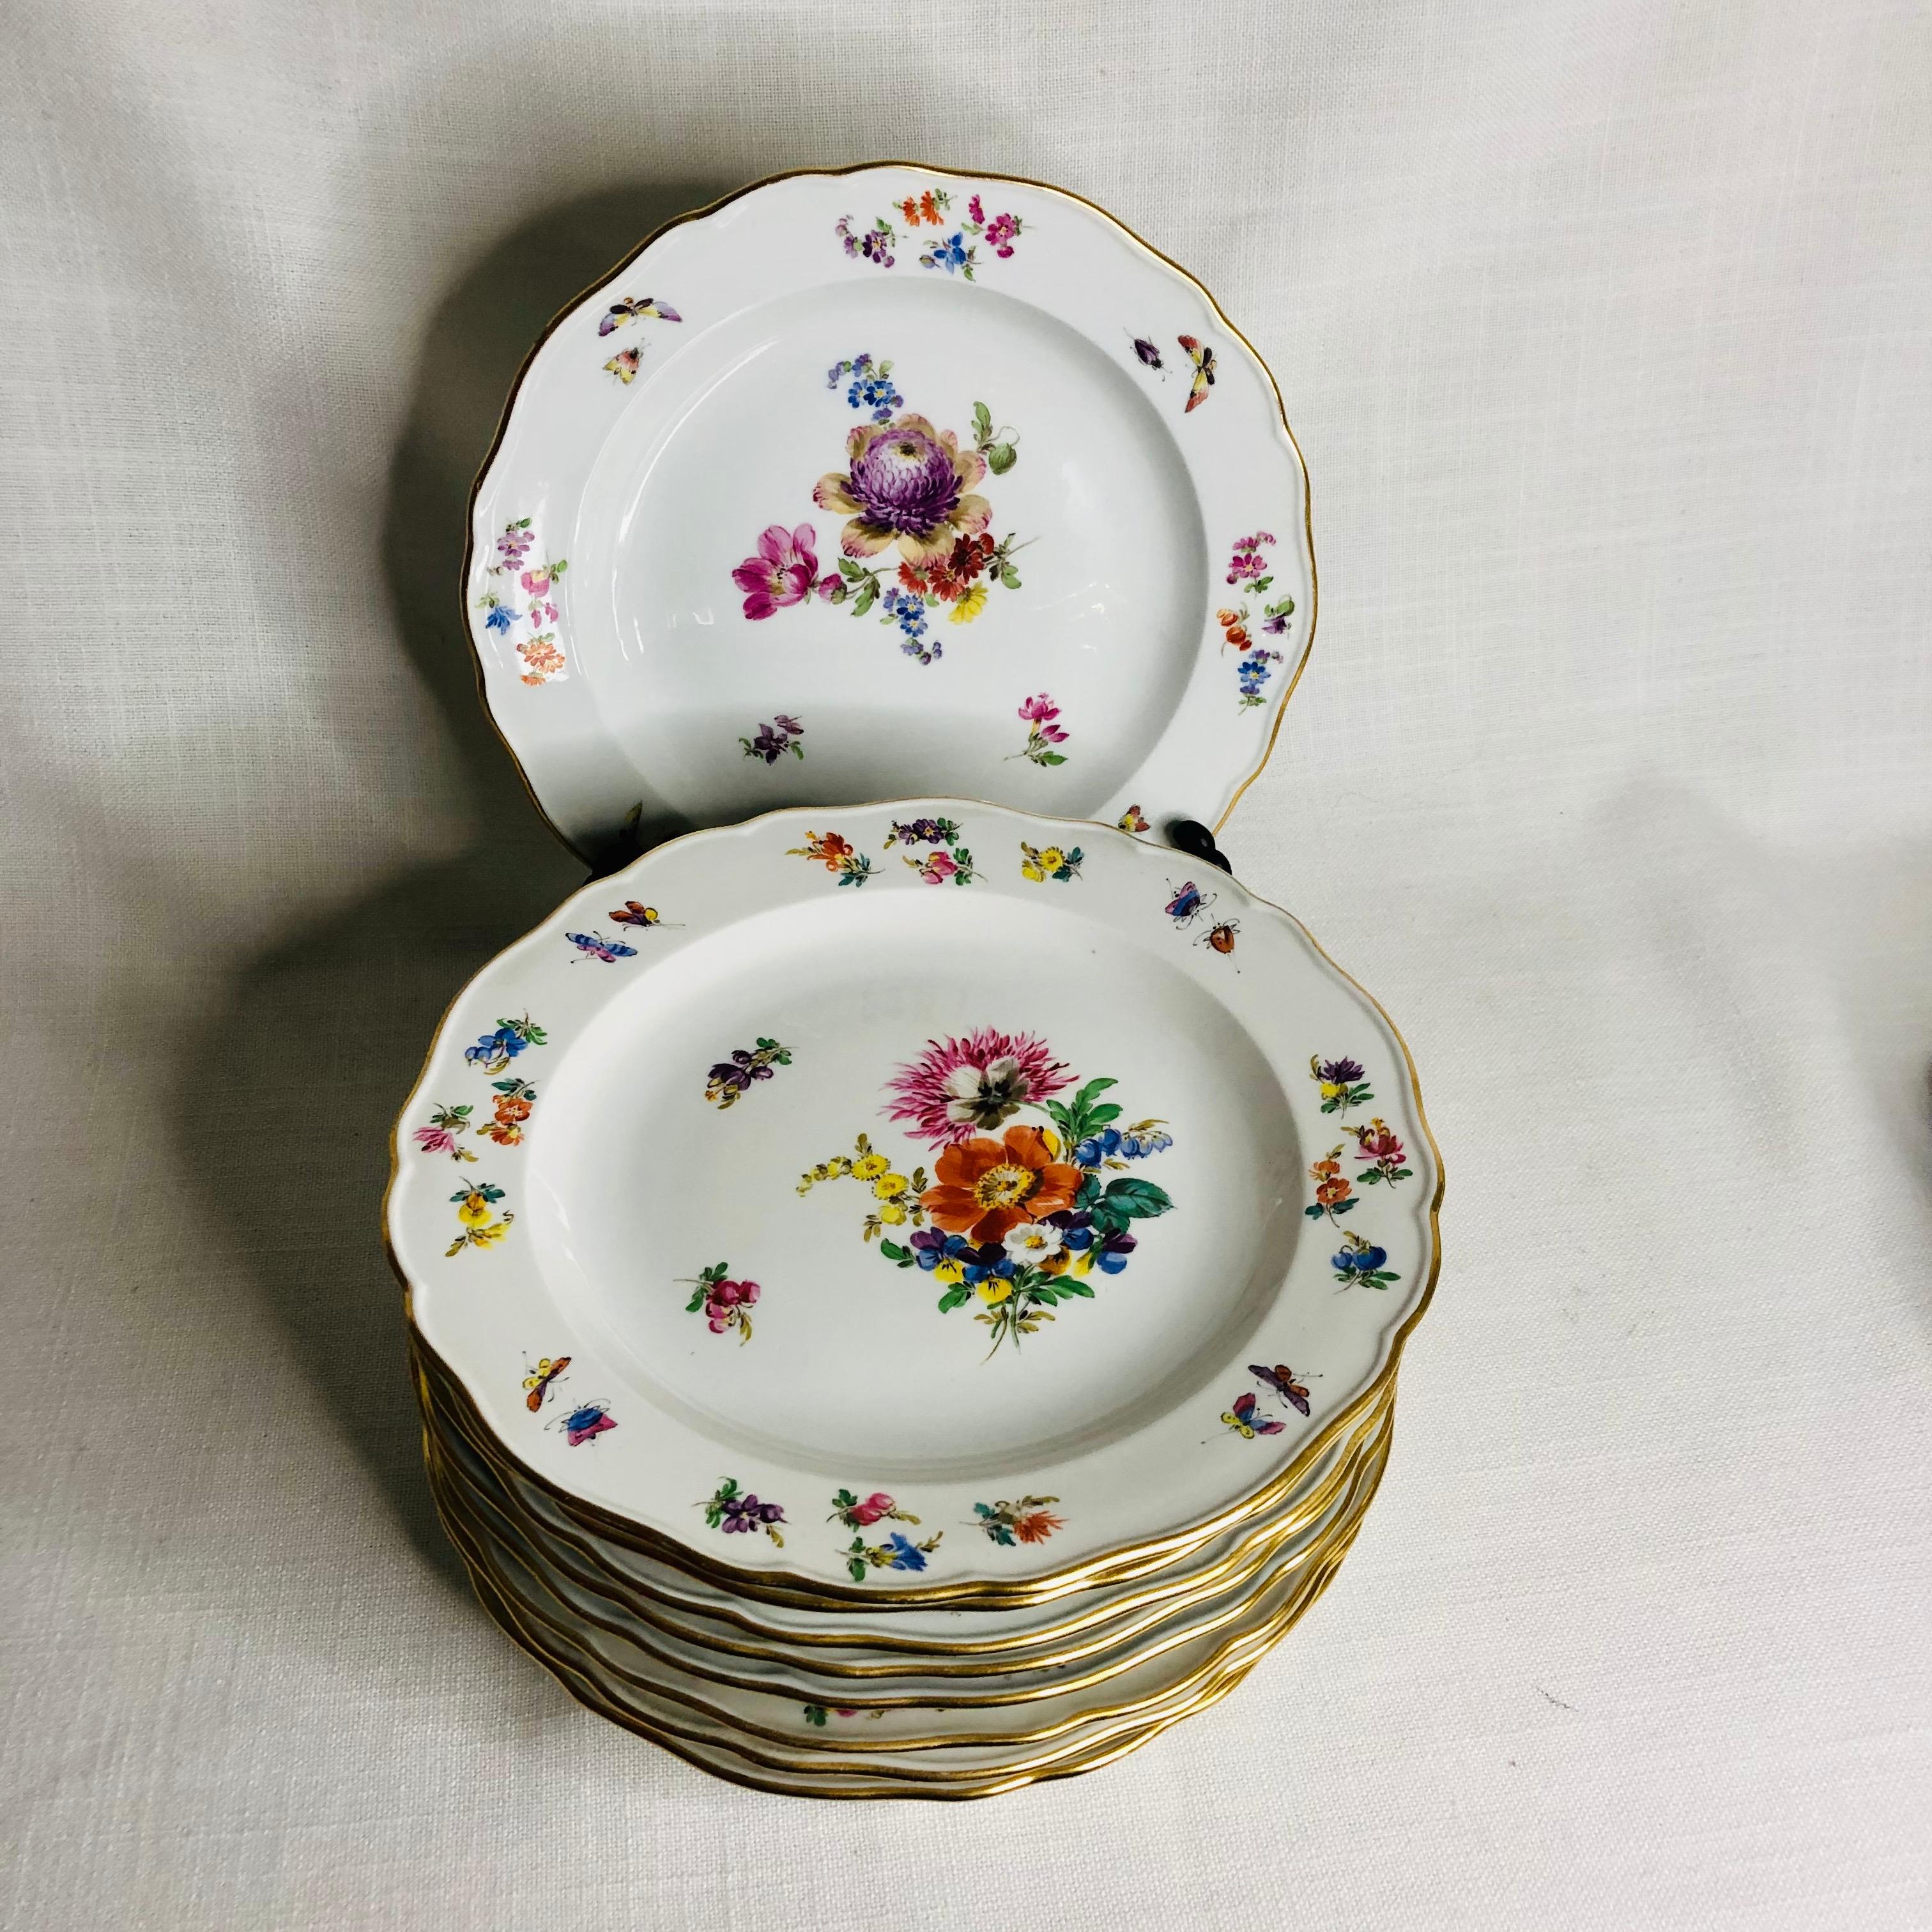 This is a fabulous set of twelve Meissen luncheon or dessert plates. Each of these Meissen plates are beautifully painted with a different large central flower bouquet. The artwork on these plates is exceptional. Inside the gold border, you. can see